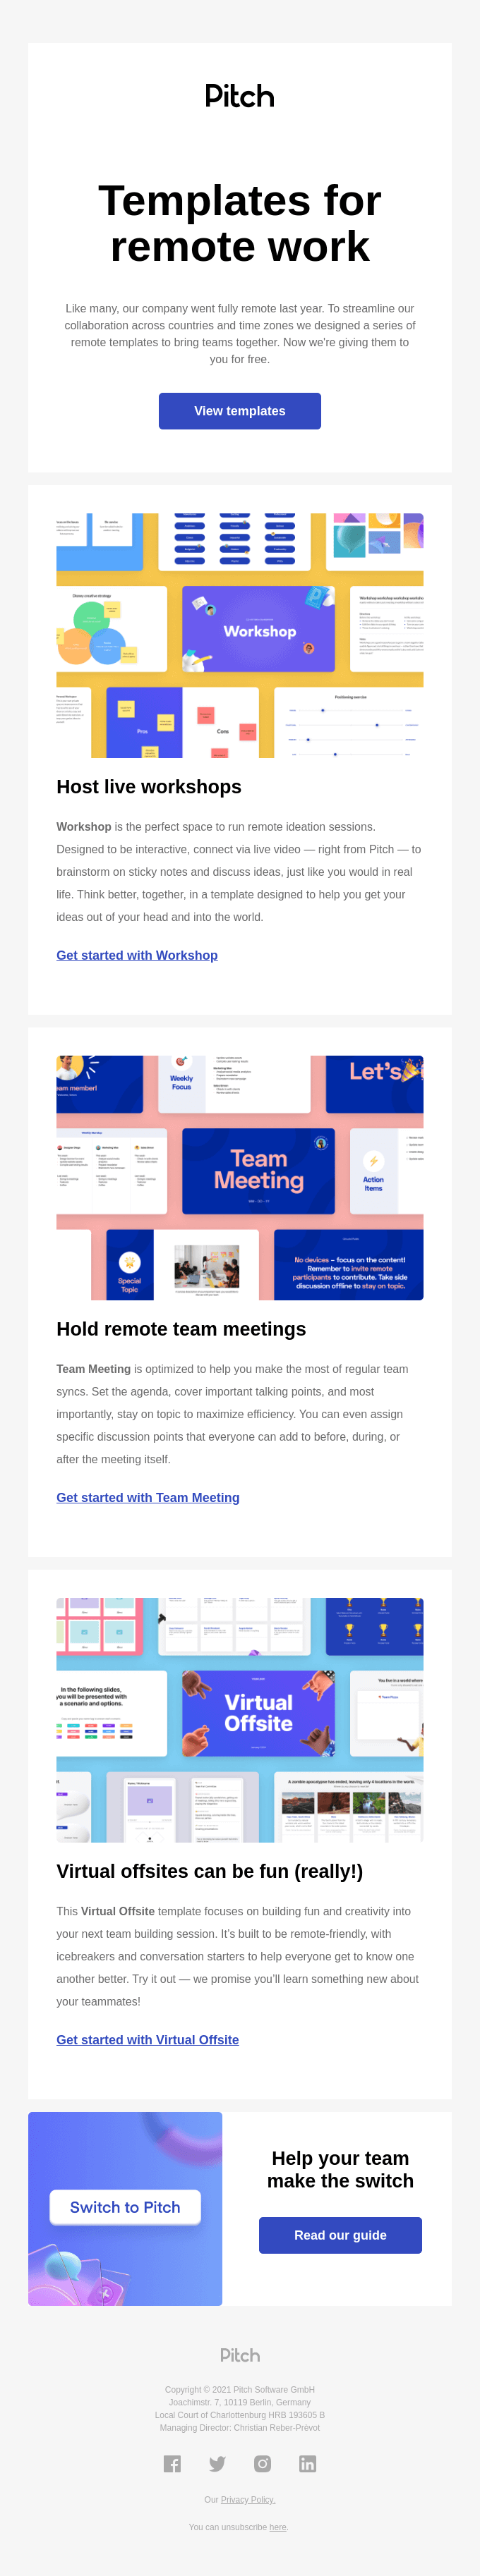 Essential remote work templates - Pitch Email Newsletter